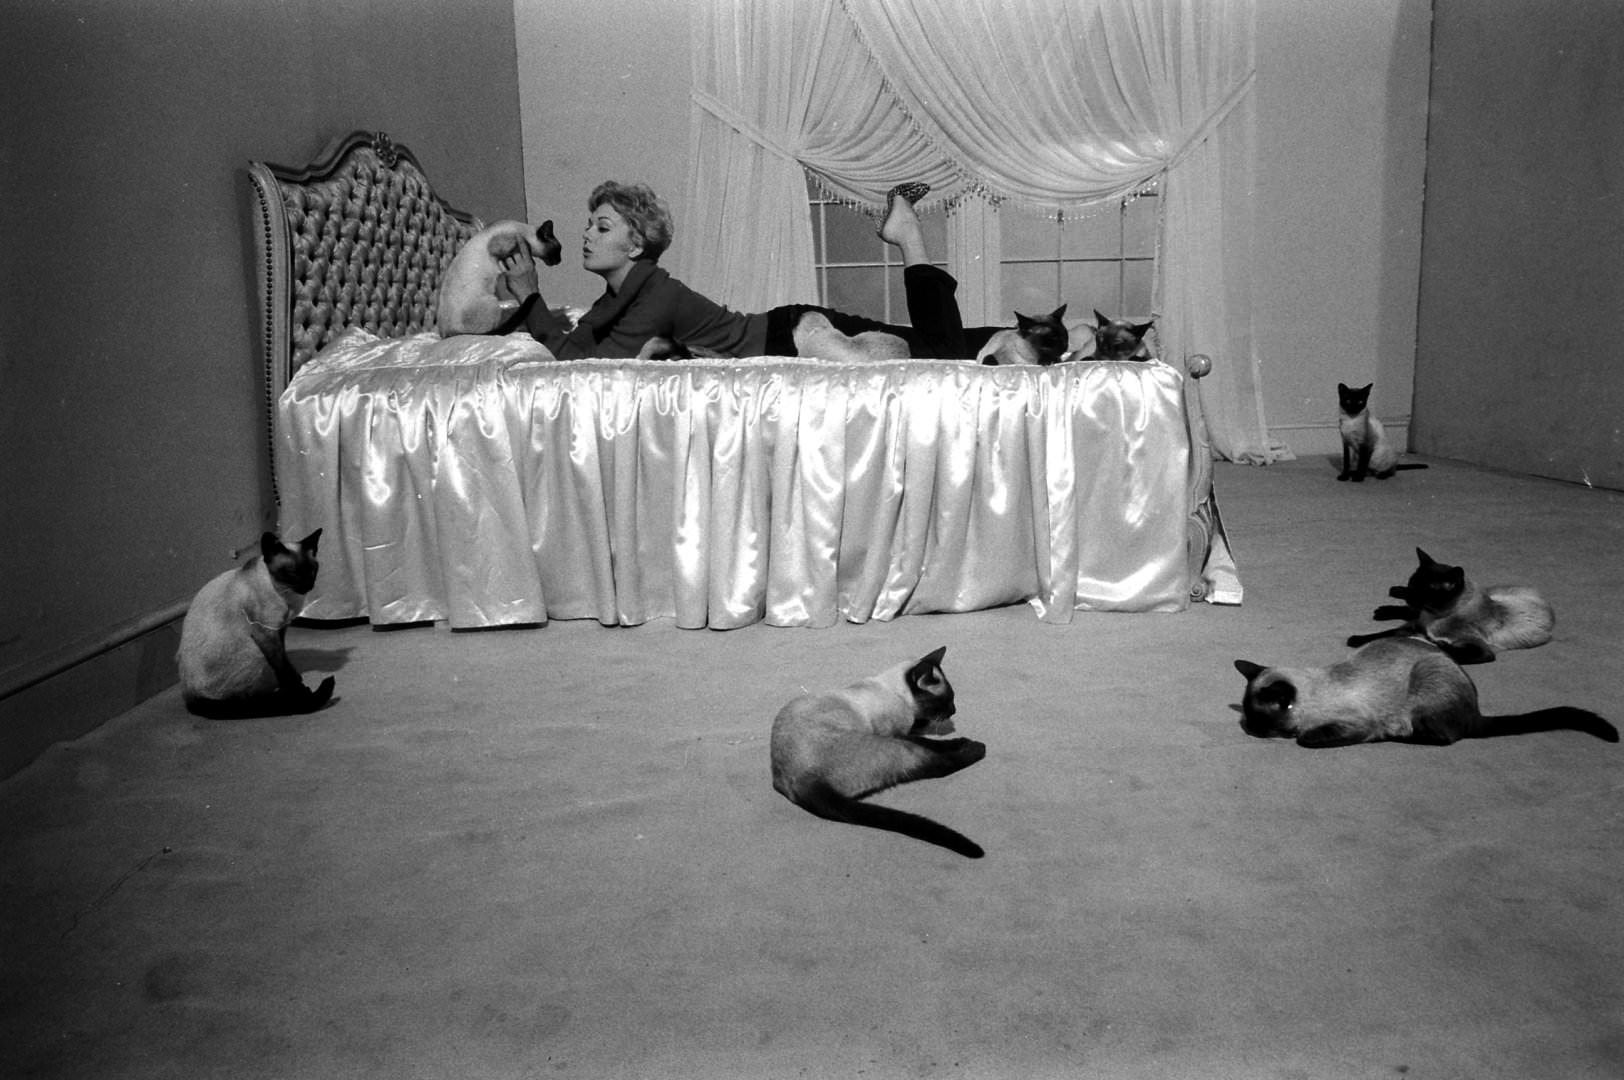 Kim Novak Playing With Some Siamese Cats, These Cats Were Casted In her Movie " Bell, Book And Candle", 1958